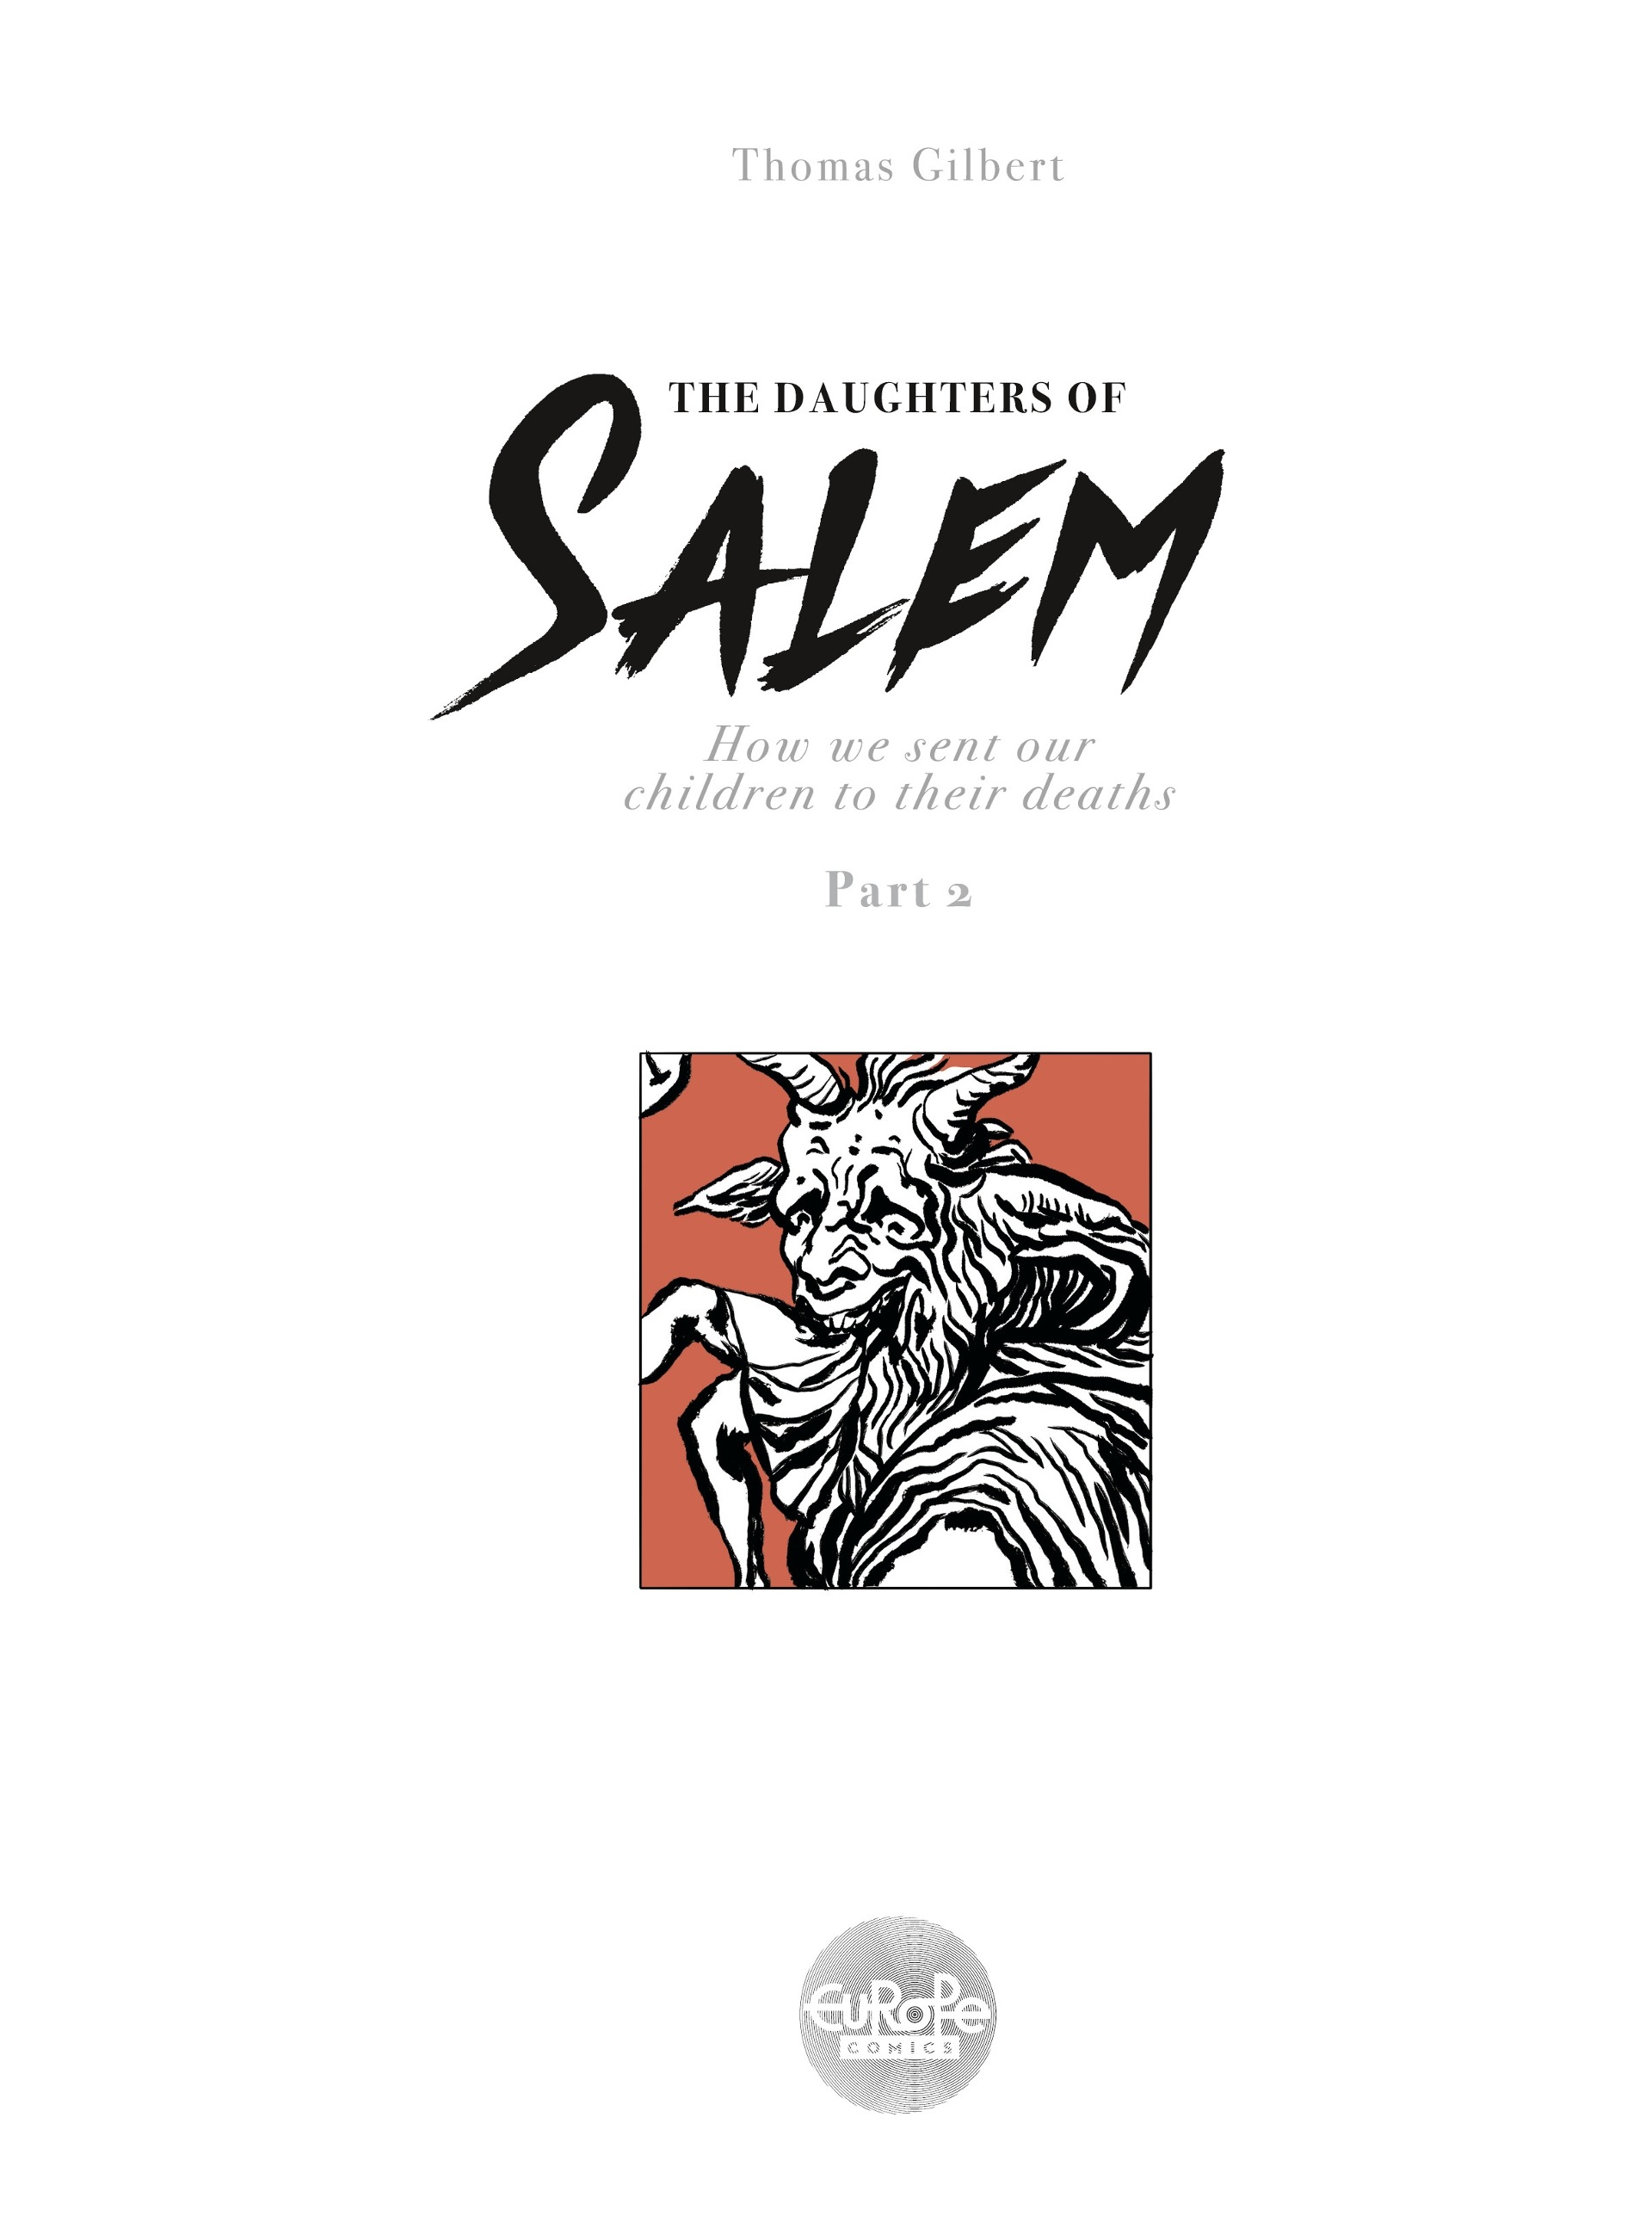 Read online The Daughters of Salem comic -  Issue # TPB 2 - 3